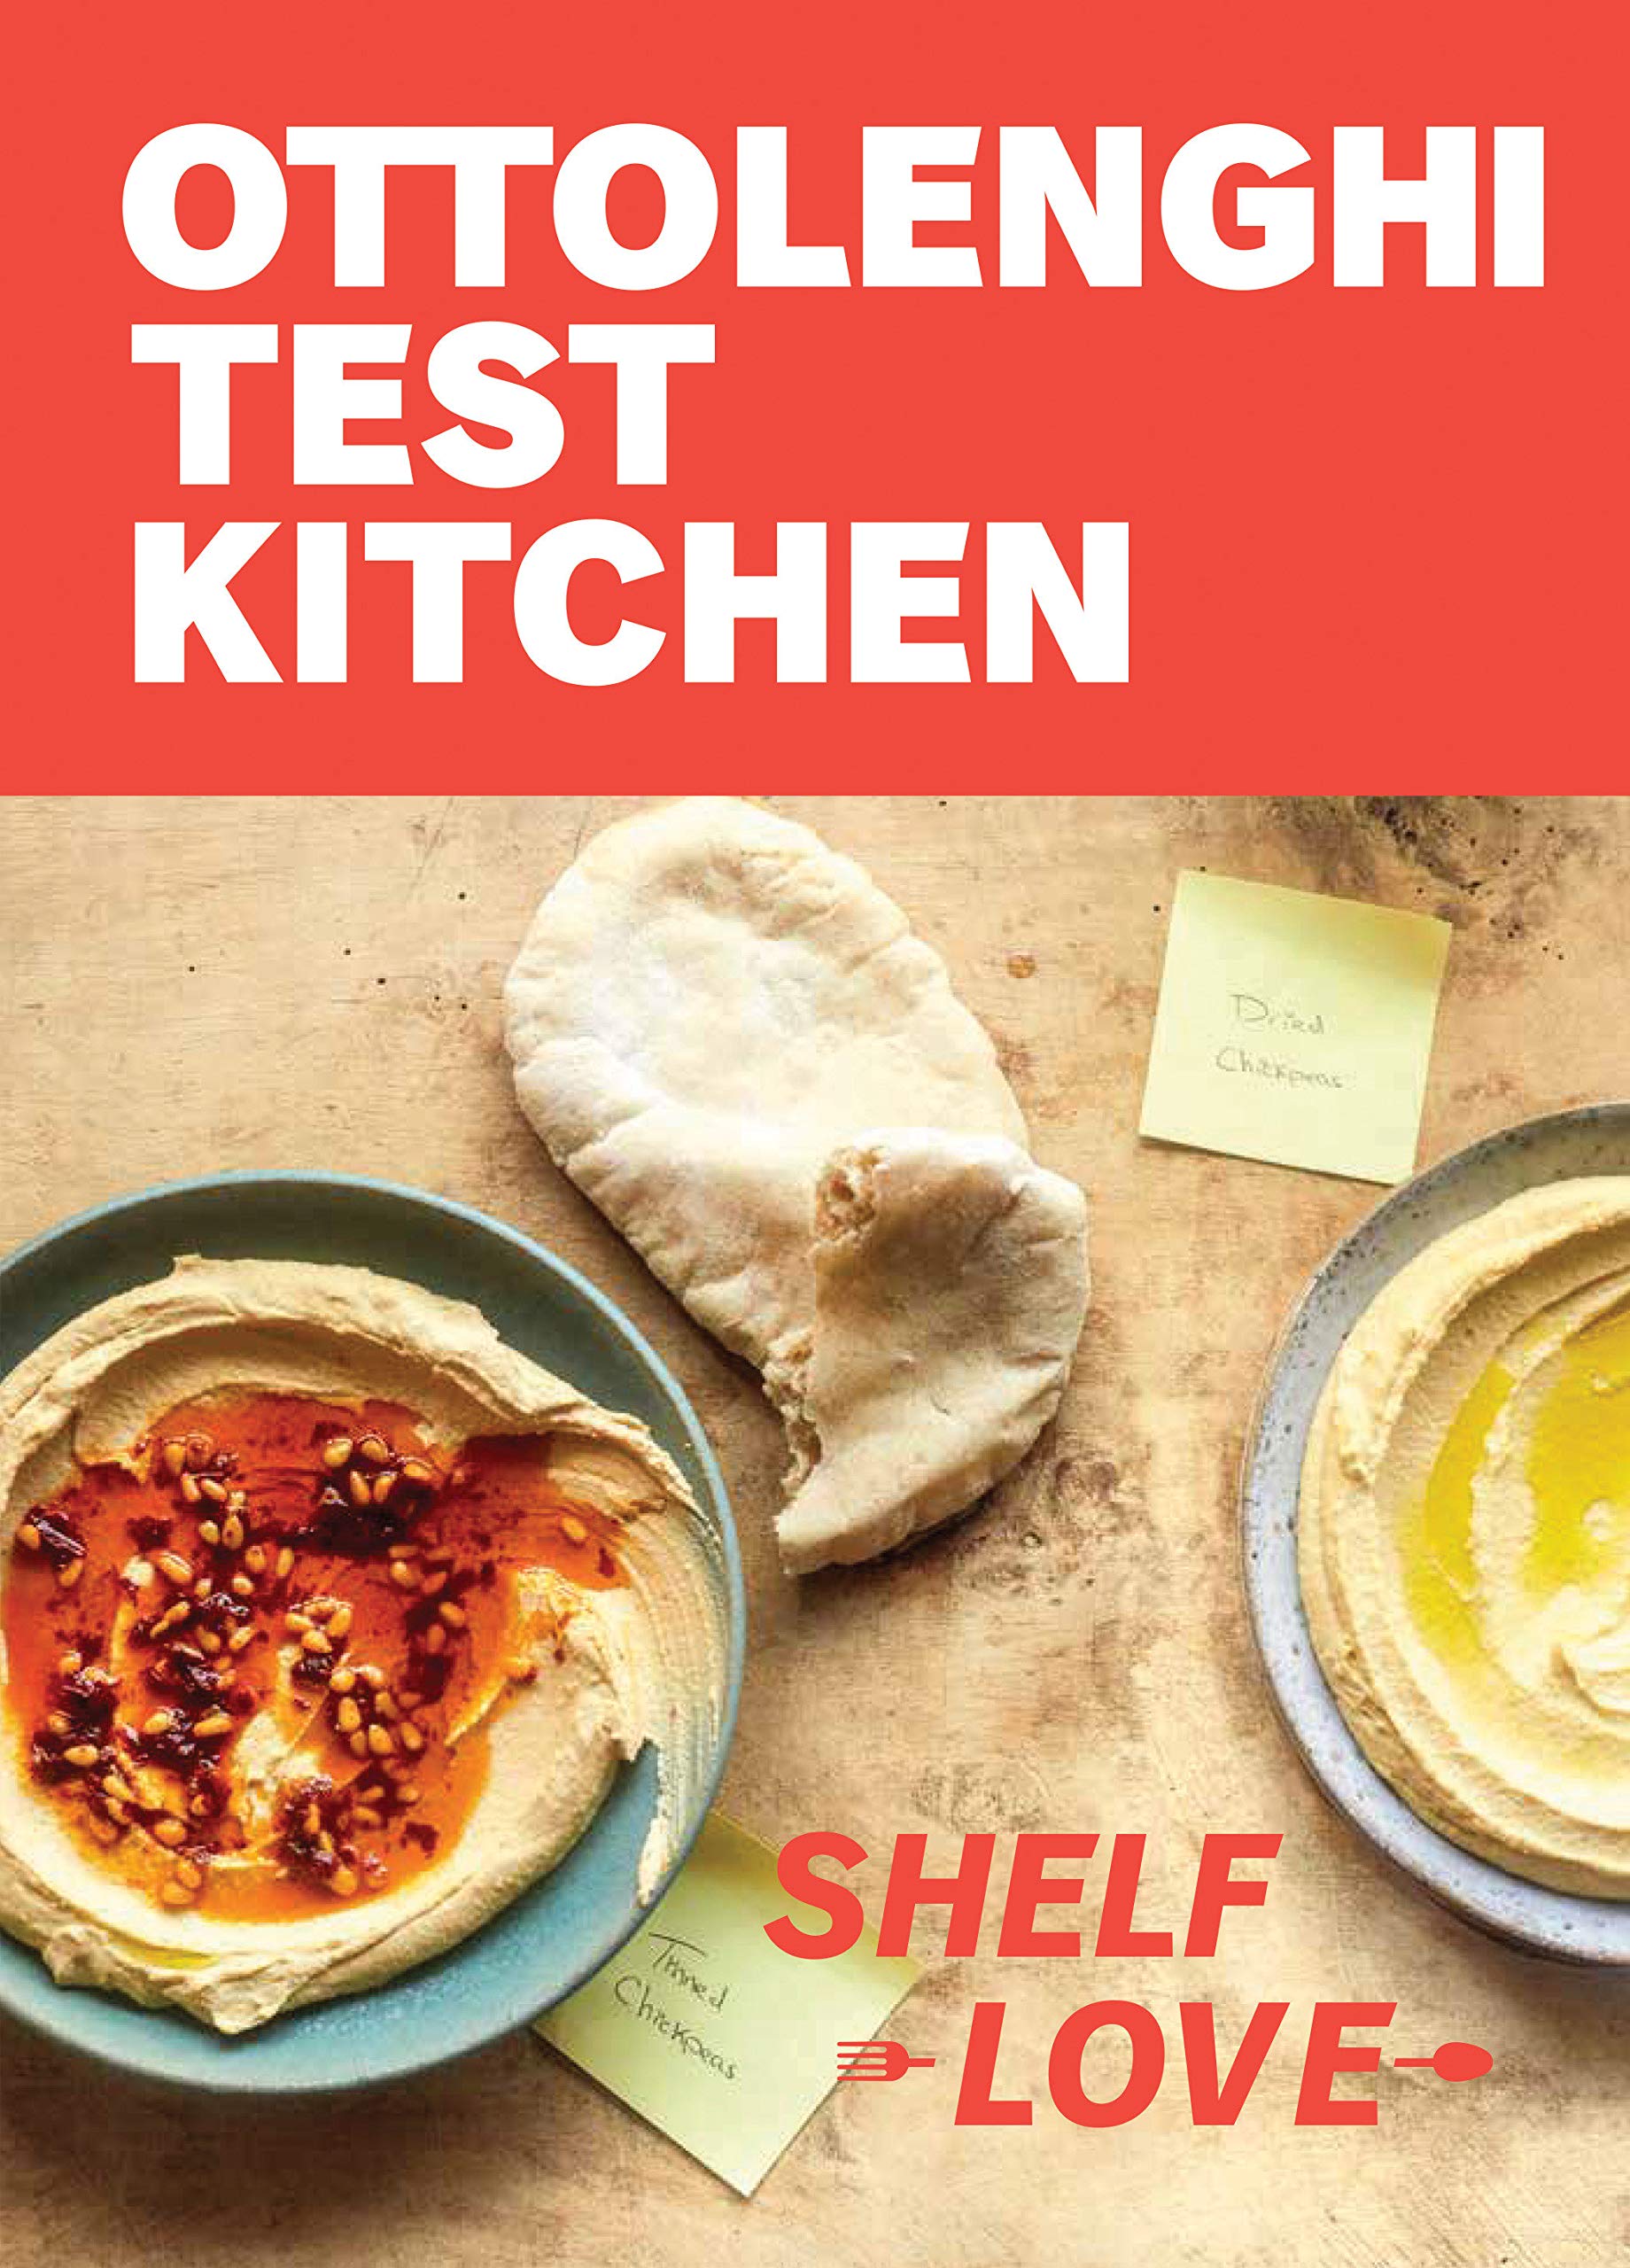 Ottolenghi Test Kitchen: Shelf Love: Recipes to Unlock the Secrets of Your Pantry, Fridge, and Freezer (Noor Murad, Yotam Ottolenghi) *Signed*